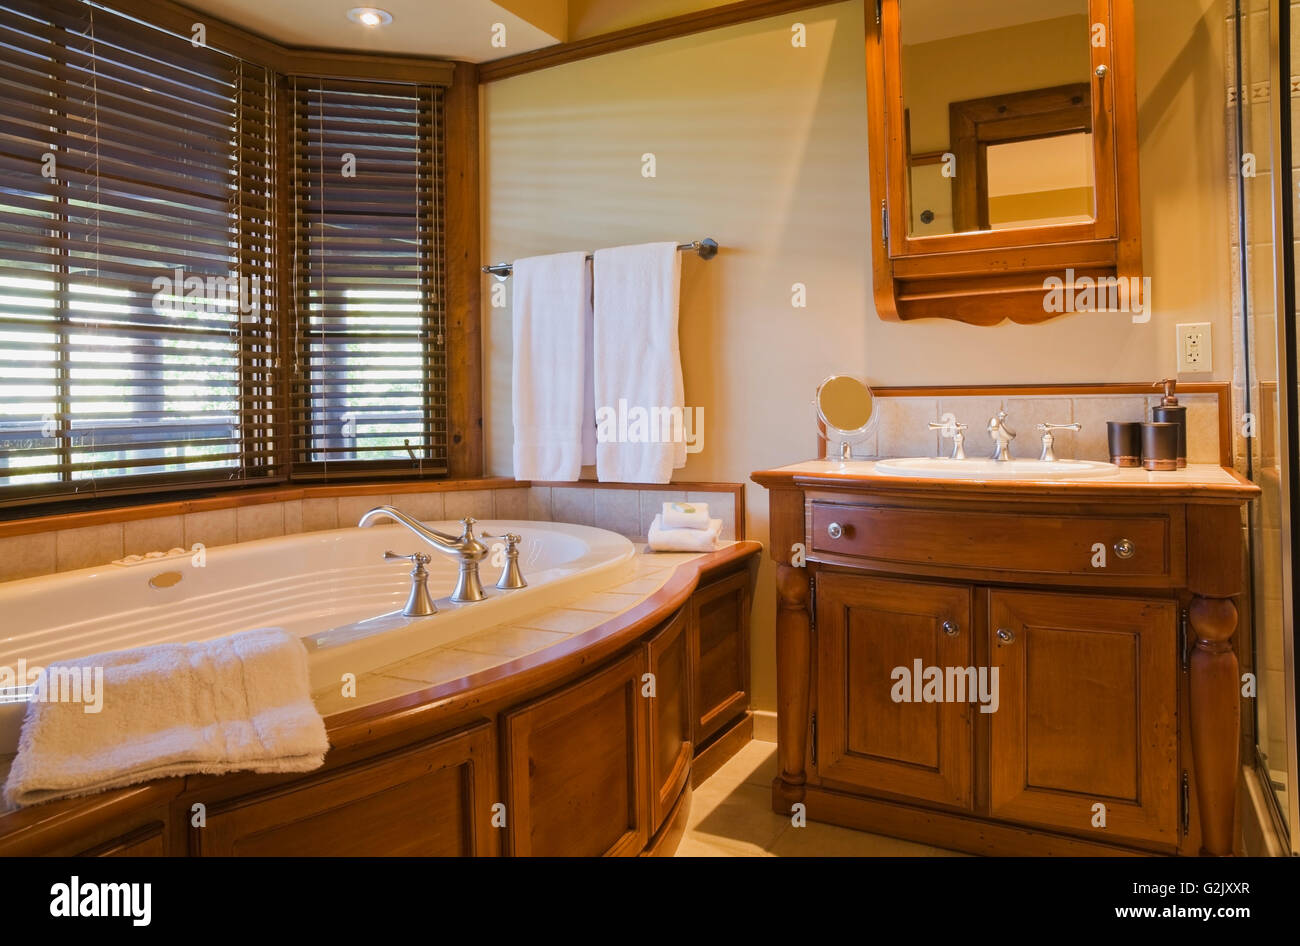 Guest bedroom ensuite oval Jacuzzi wooden vanity in basement inside a luxurious cottage style log home Quebec Canada This image Stock Photo